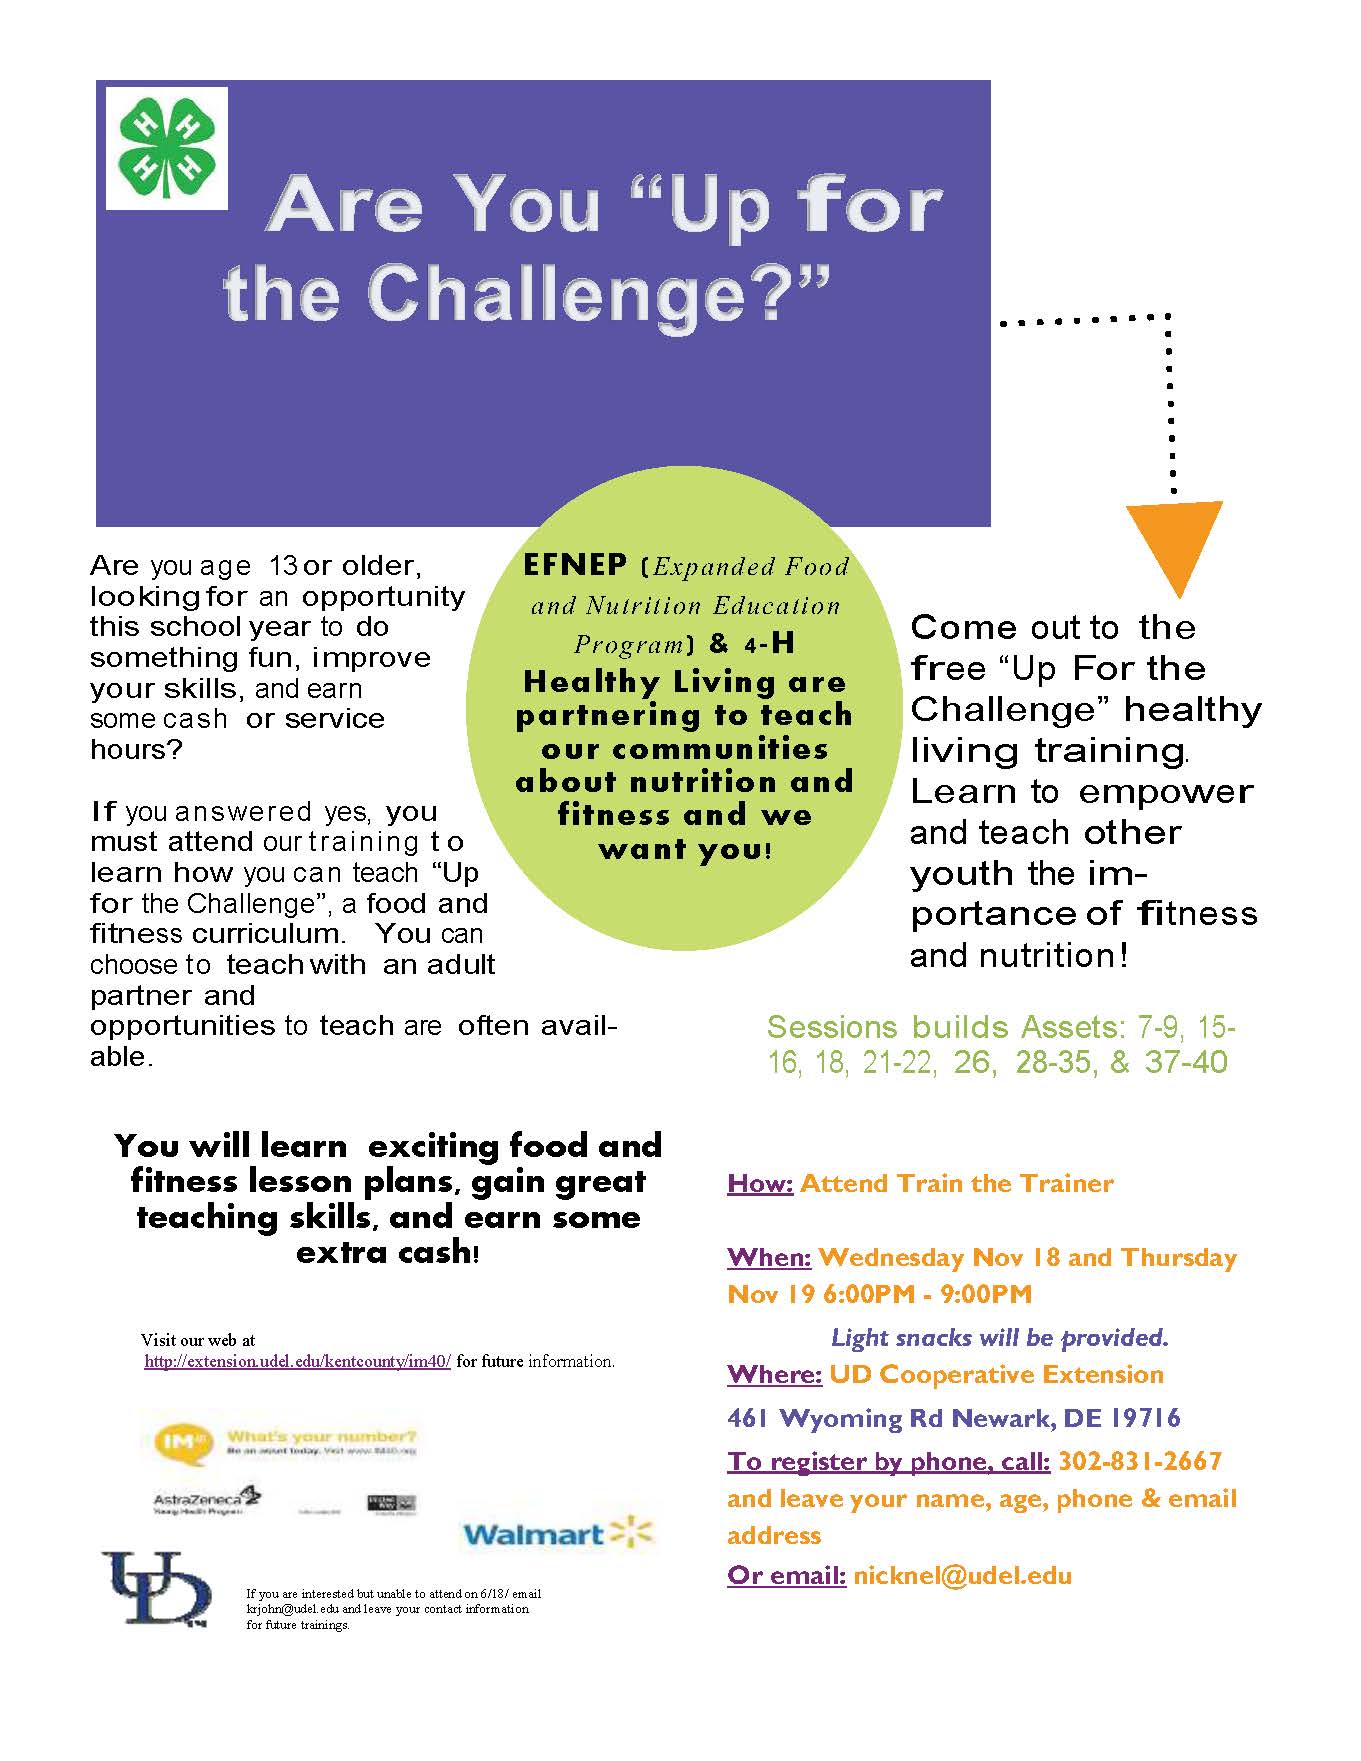 Up For The Challenge Train the Trainer Flyer Fall 2015 (NCC)